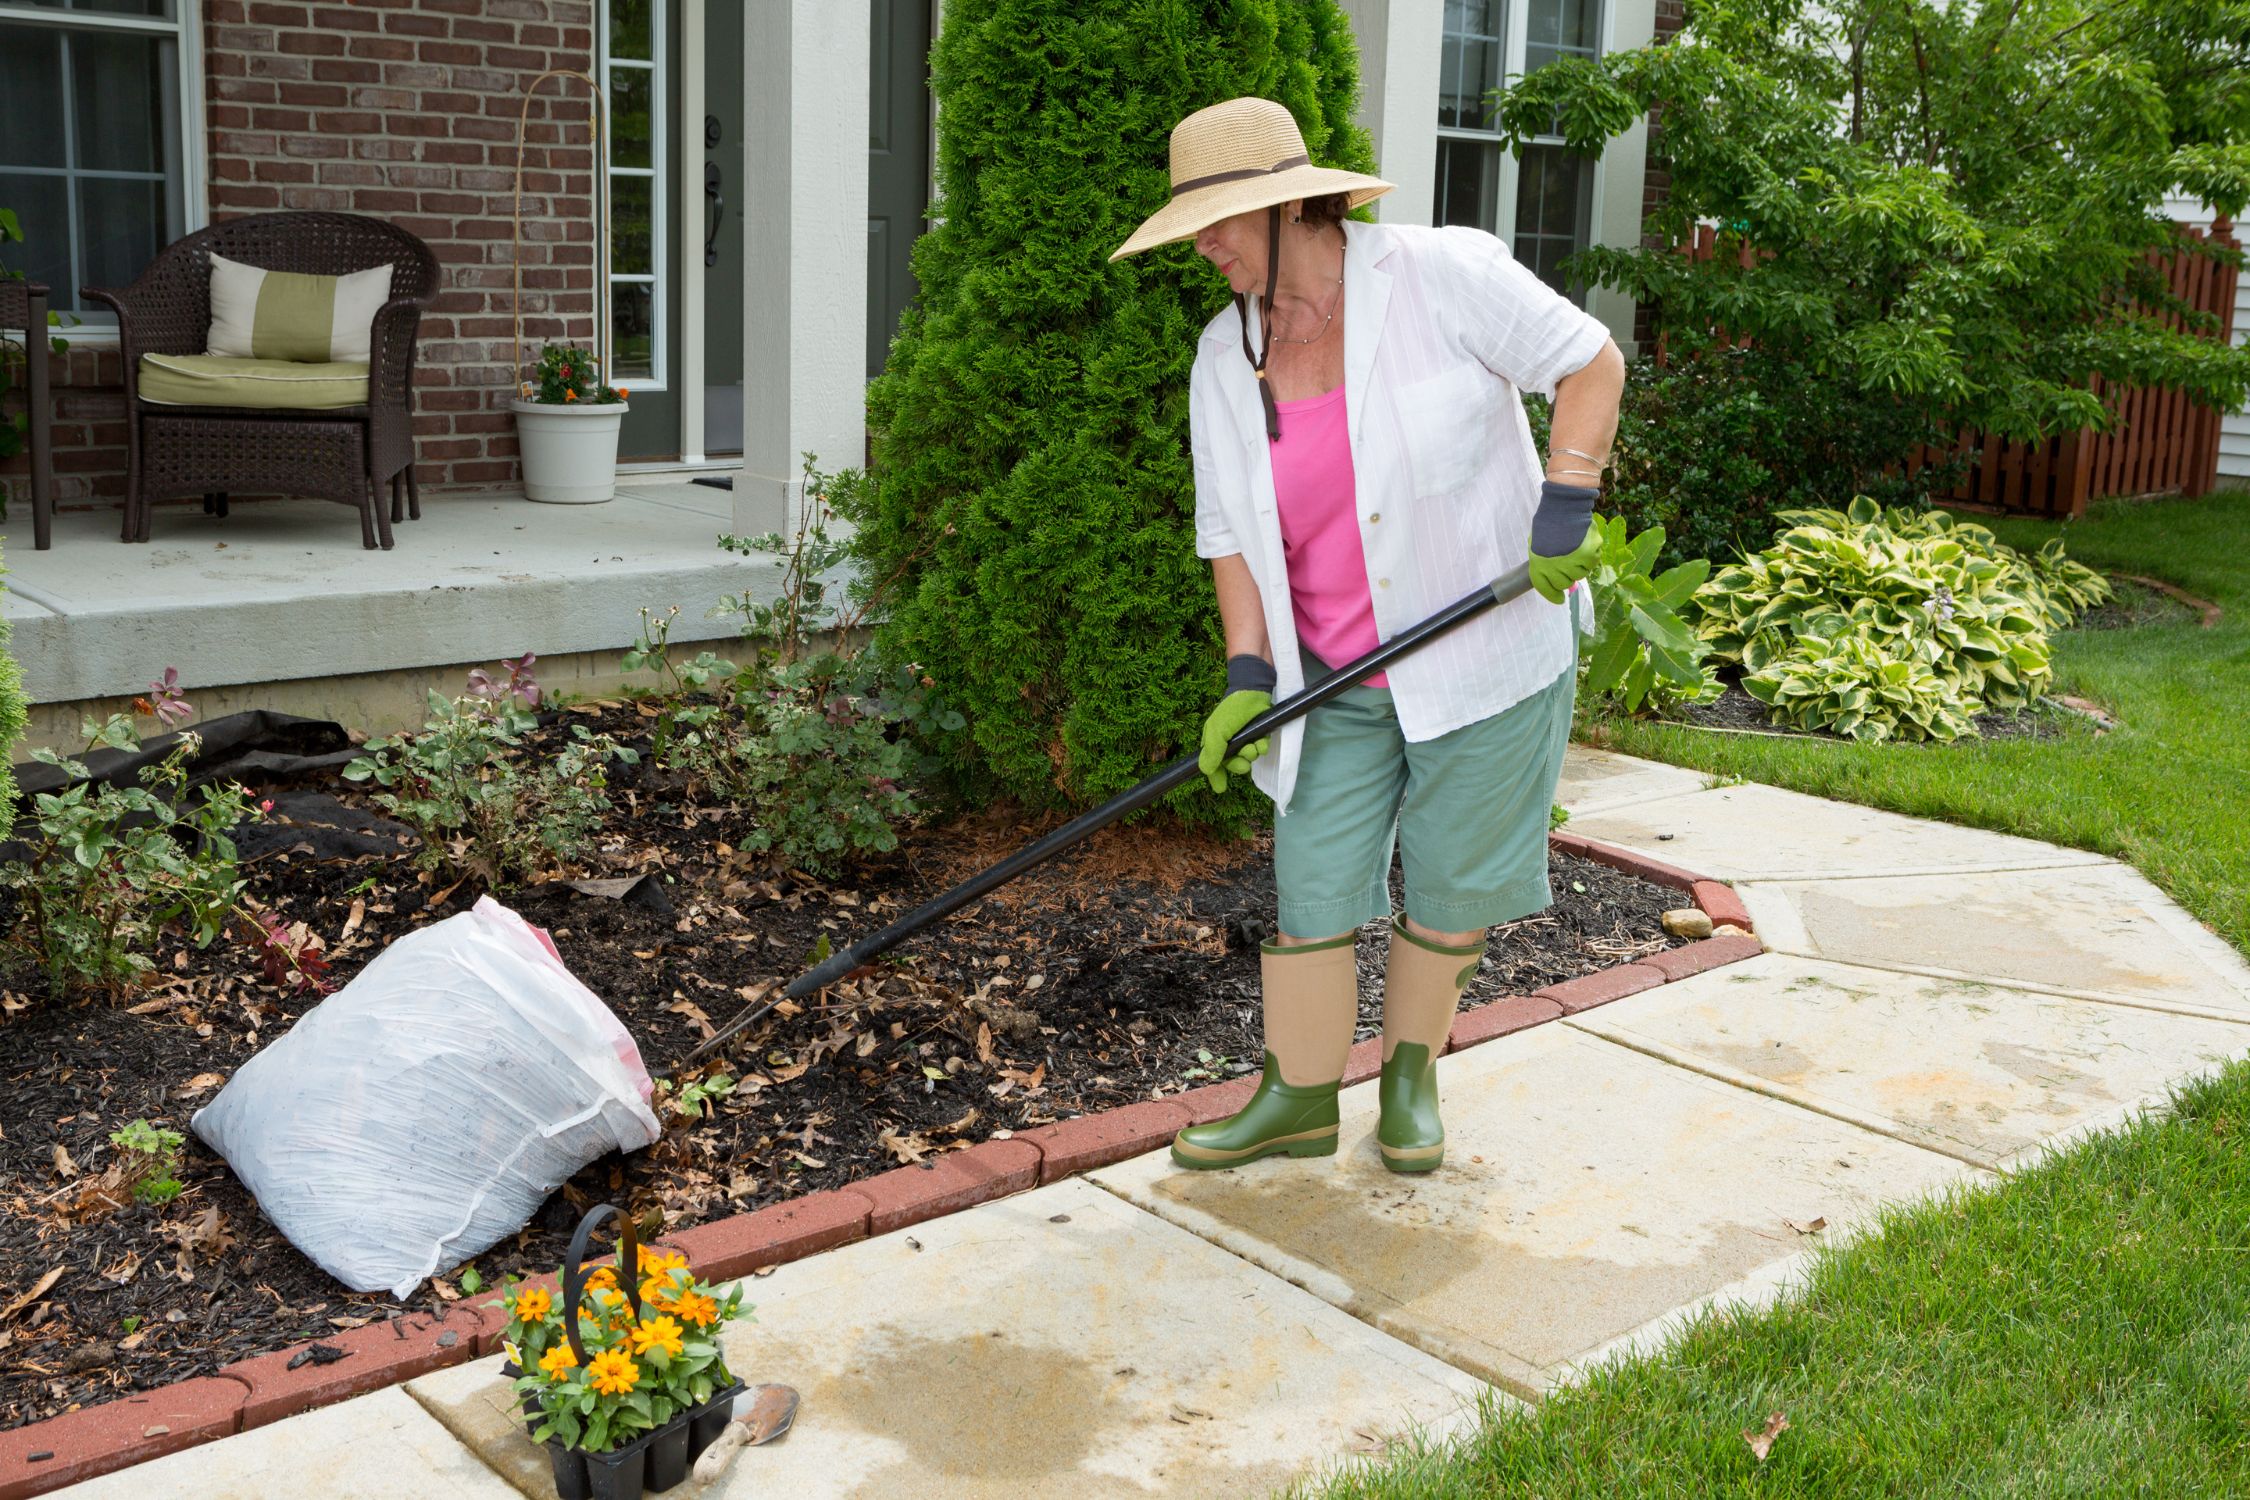 Tips for Getting Your Yard Ready for Summertime